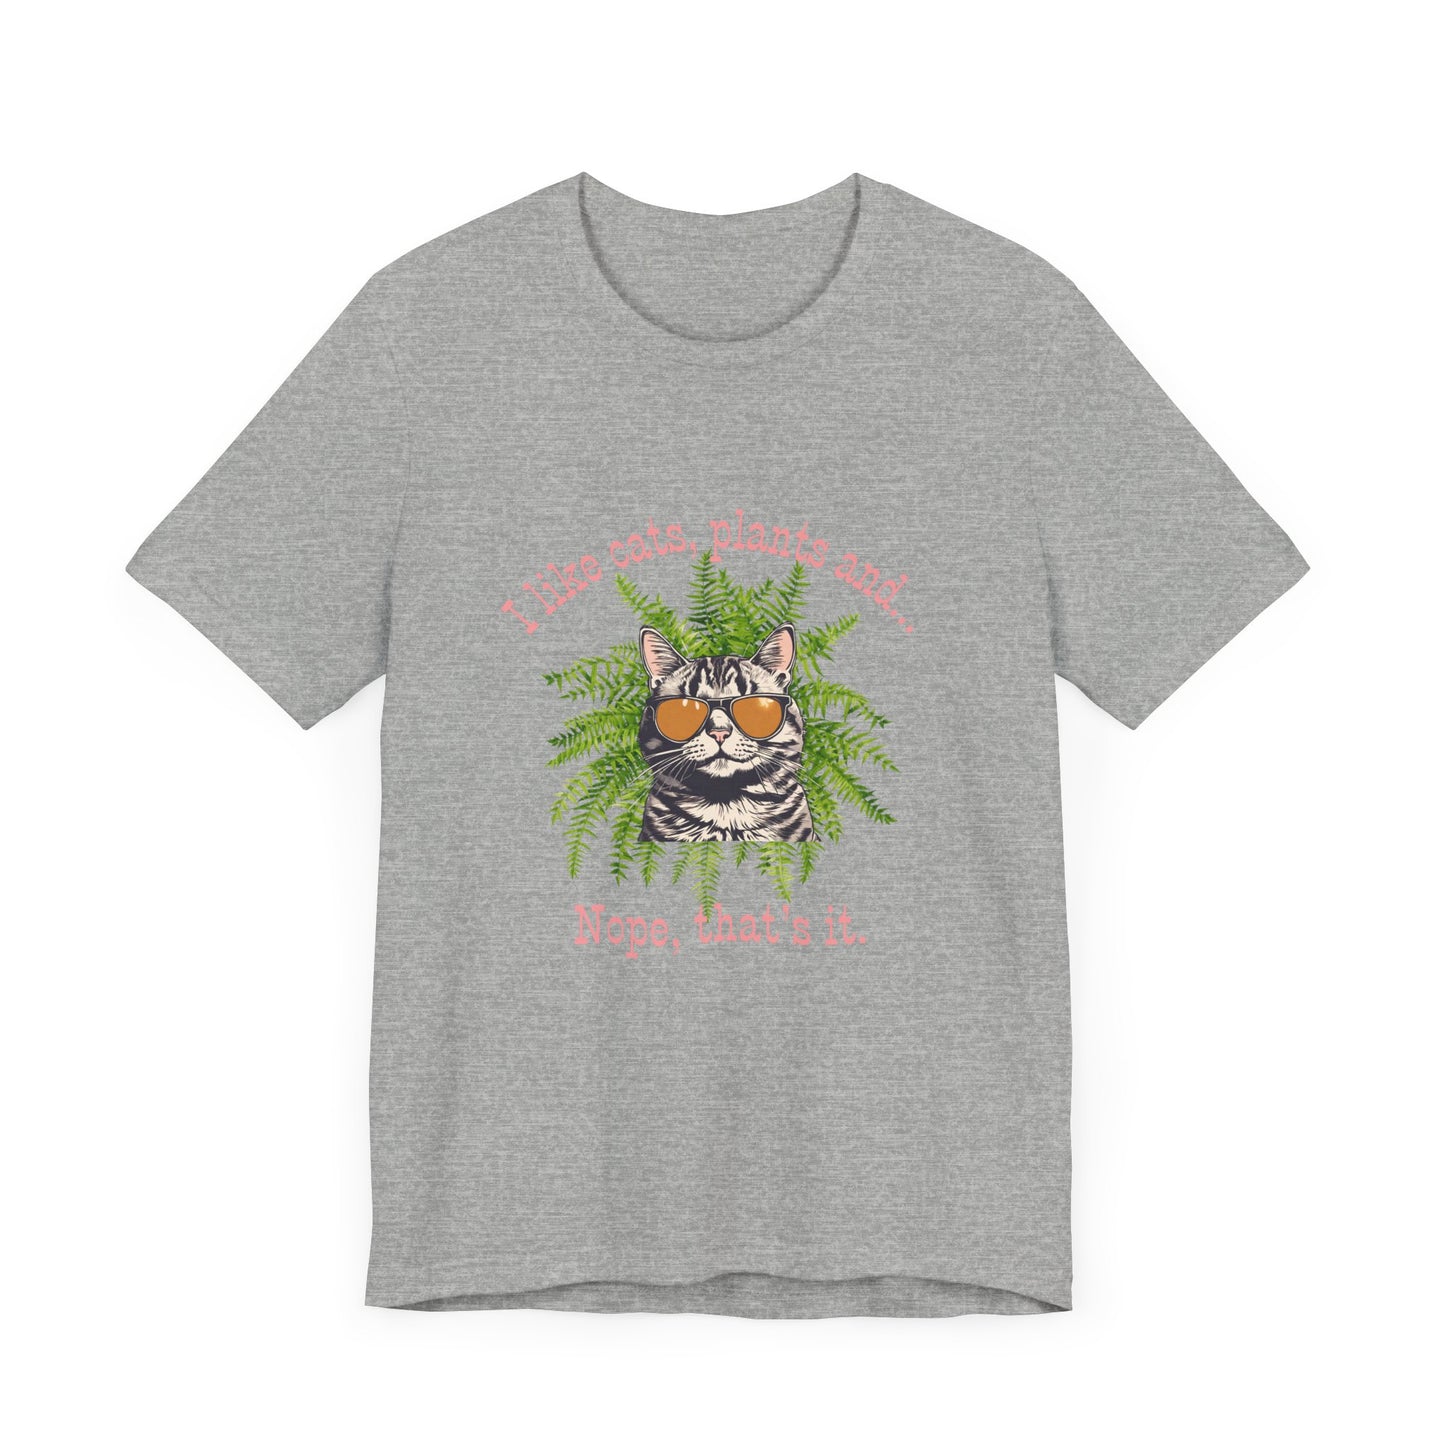 Cat Lady - Cats, plants and... Super soft Unisex Jersey Short Sleeve Tee